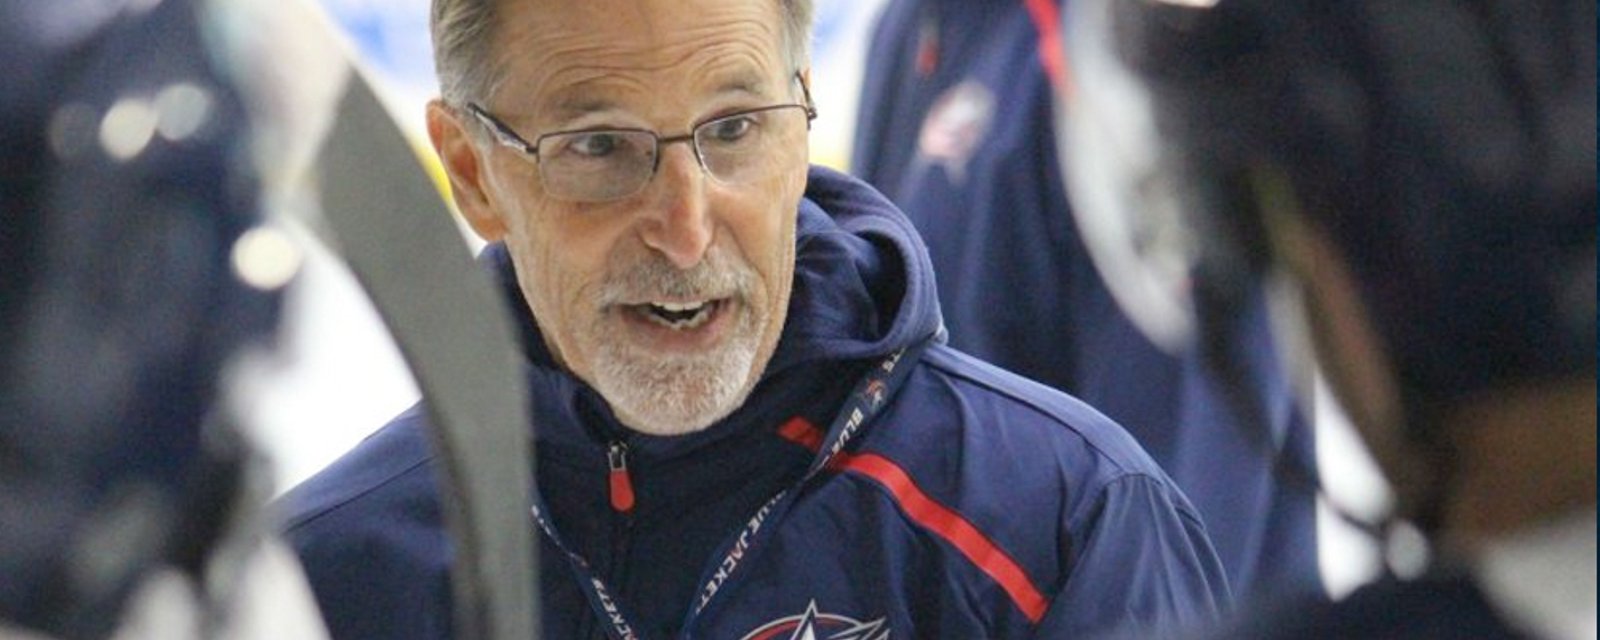 Tortorella rips into Blue Jackets, goes on expletive filled rant just 15 seconds into practice